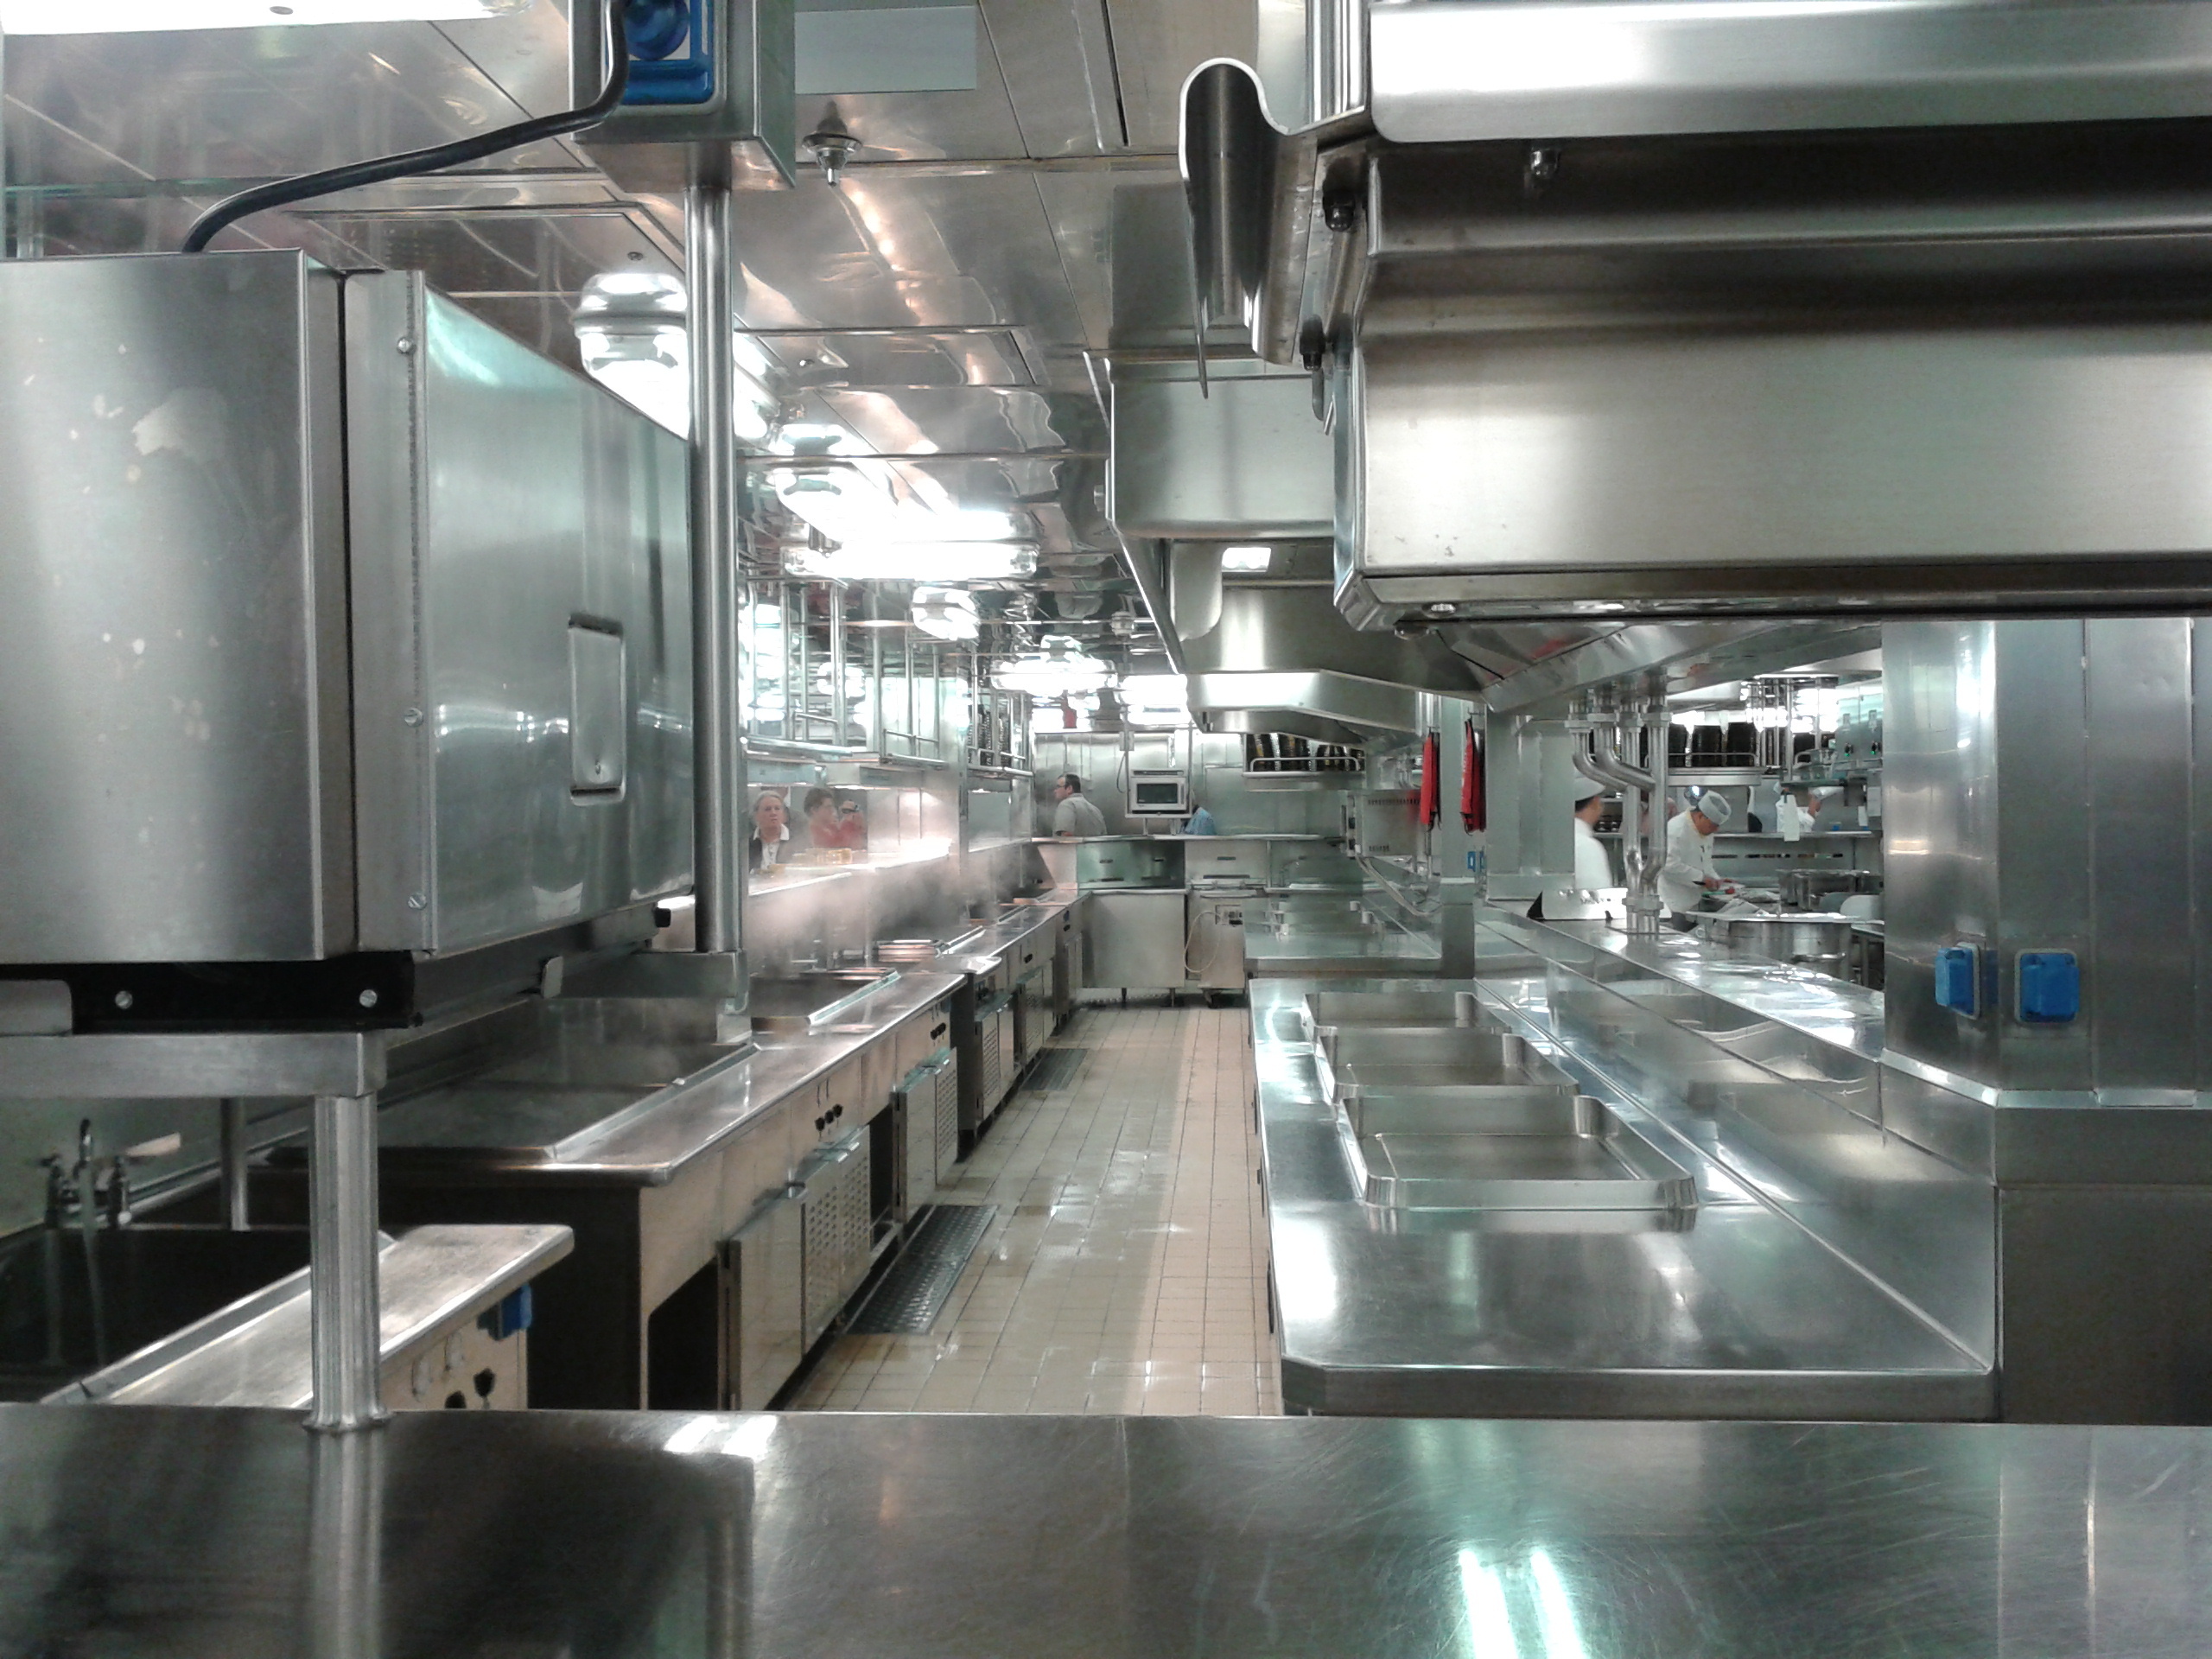 commercial kitchen cleaning in ny and ct